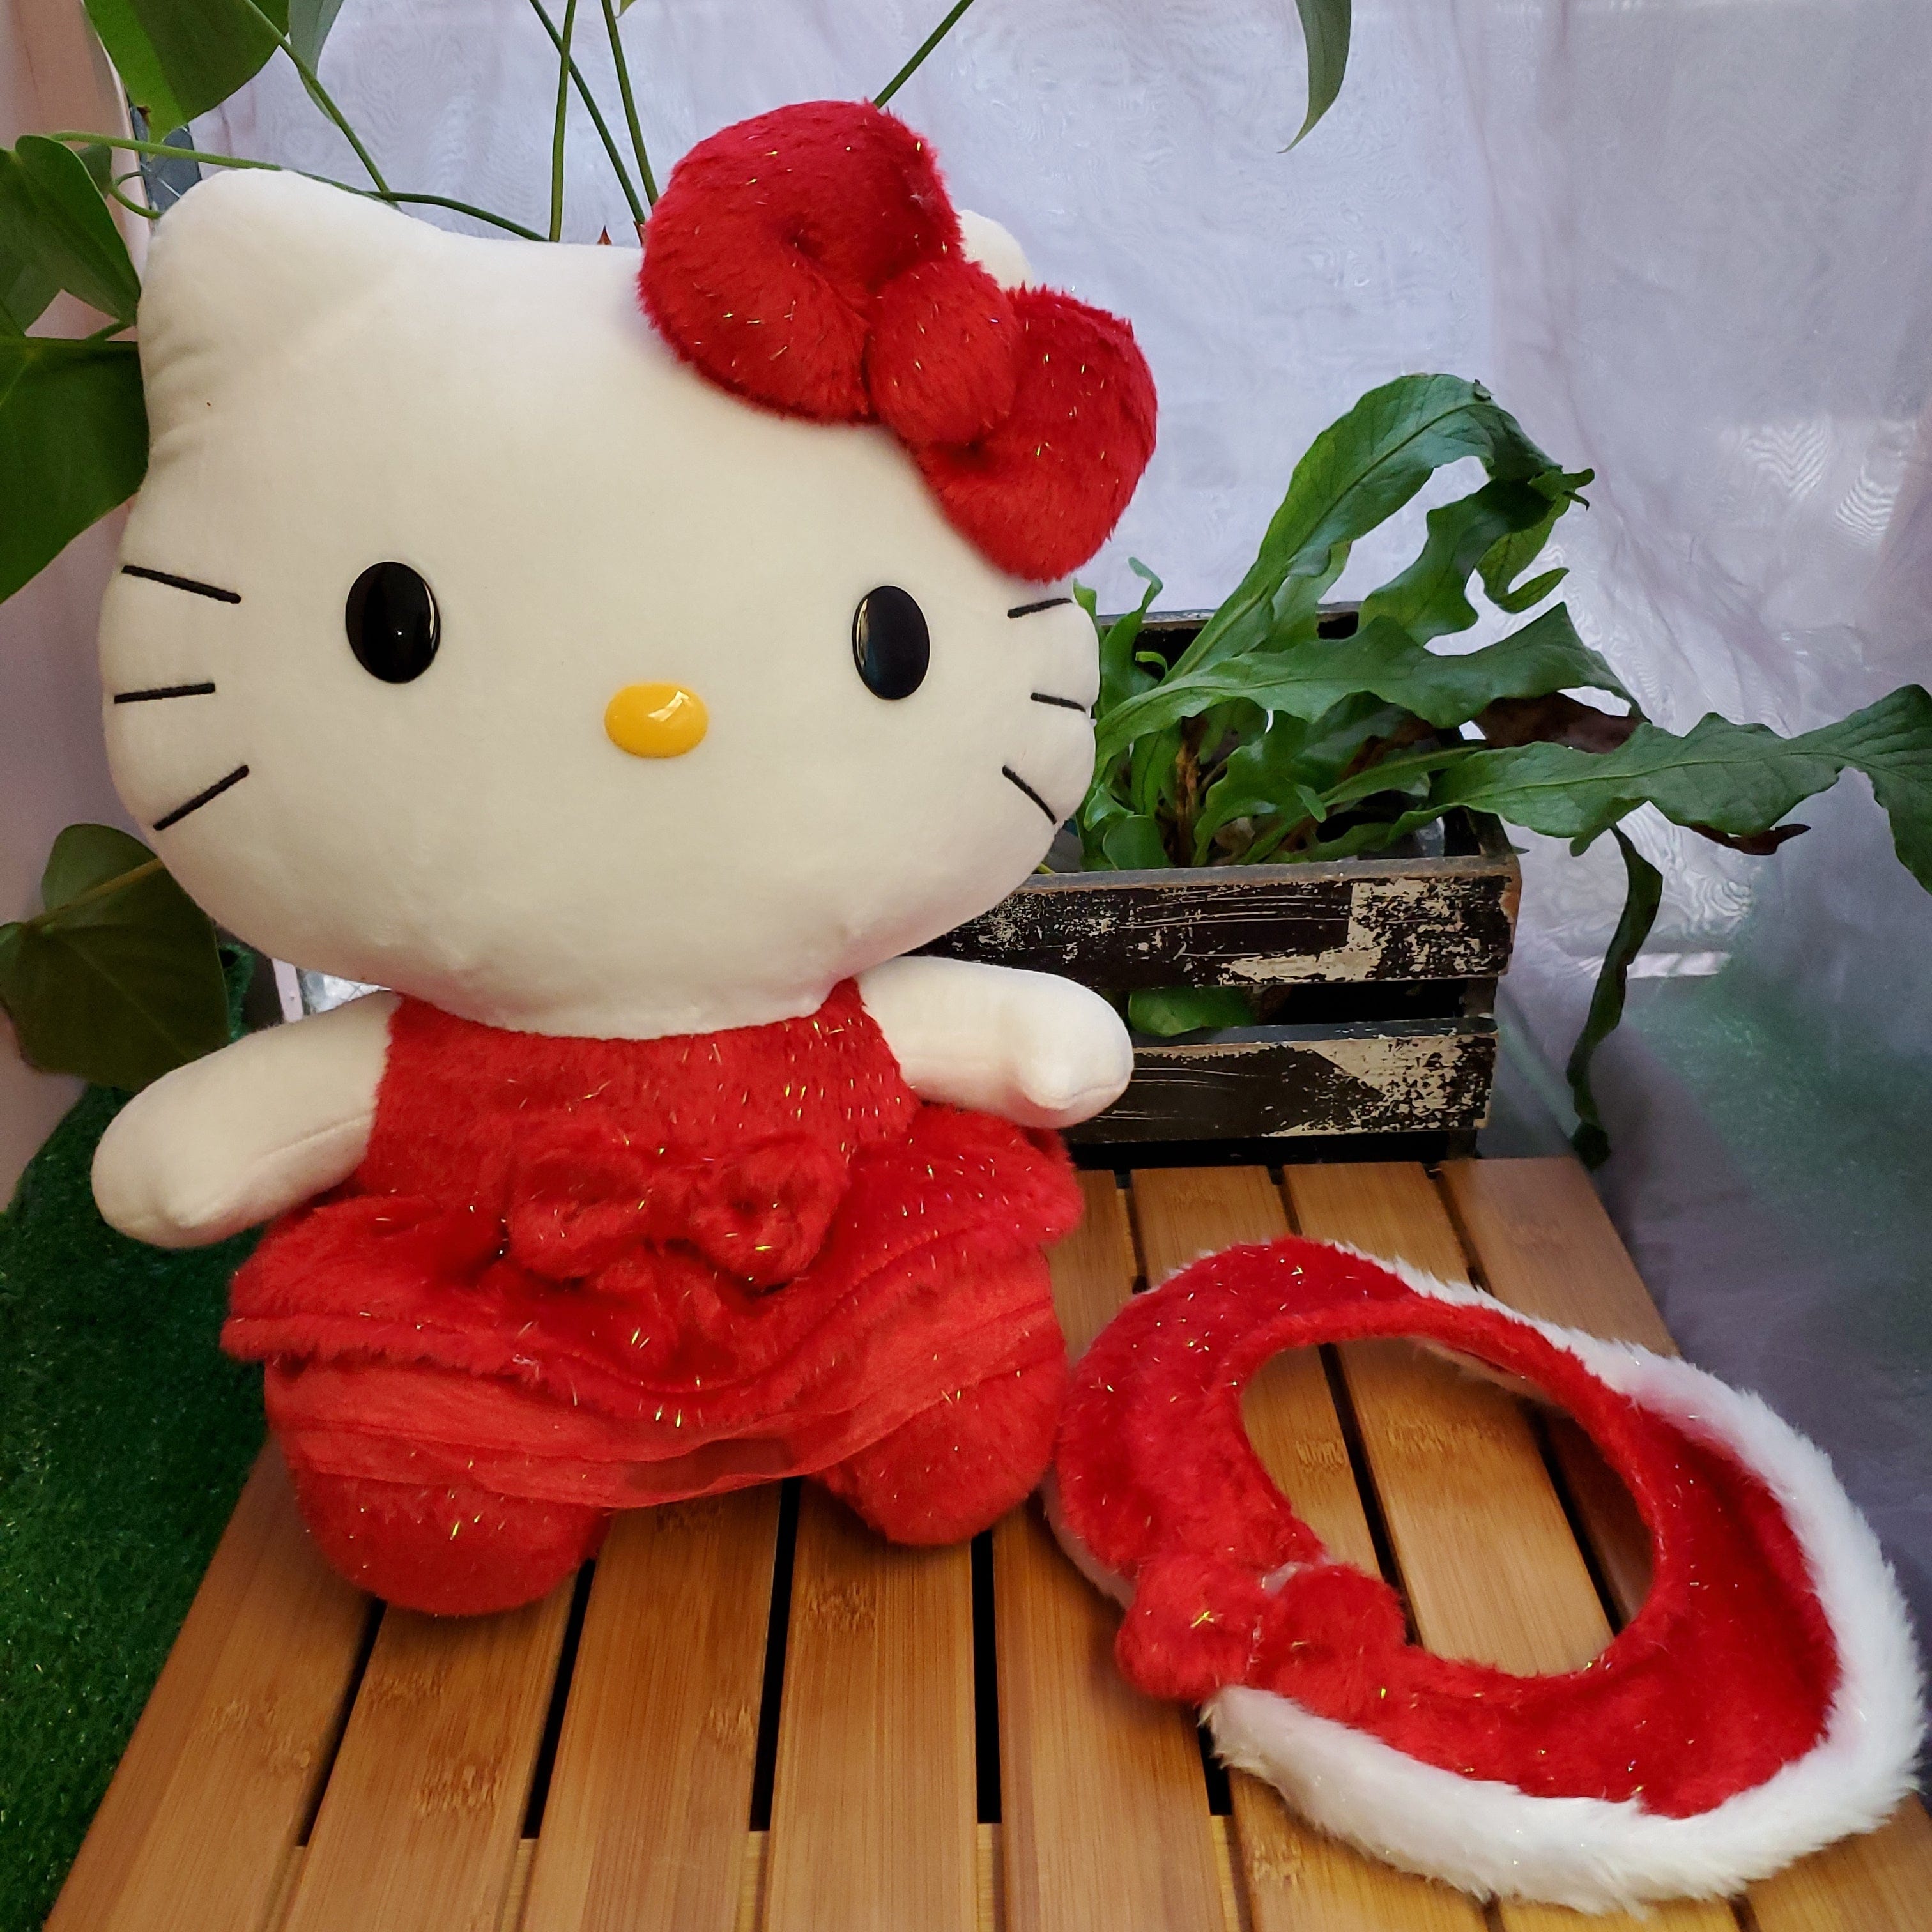 Hello Kitty Plush Toys for Kids, 4.5” Inch Stuffed Animal Plushie Backpack  Decorations Bag Lucky Pendant Dolls Gift for Girls (Red)